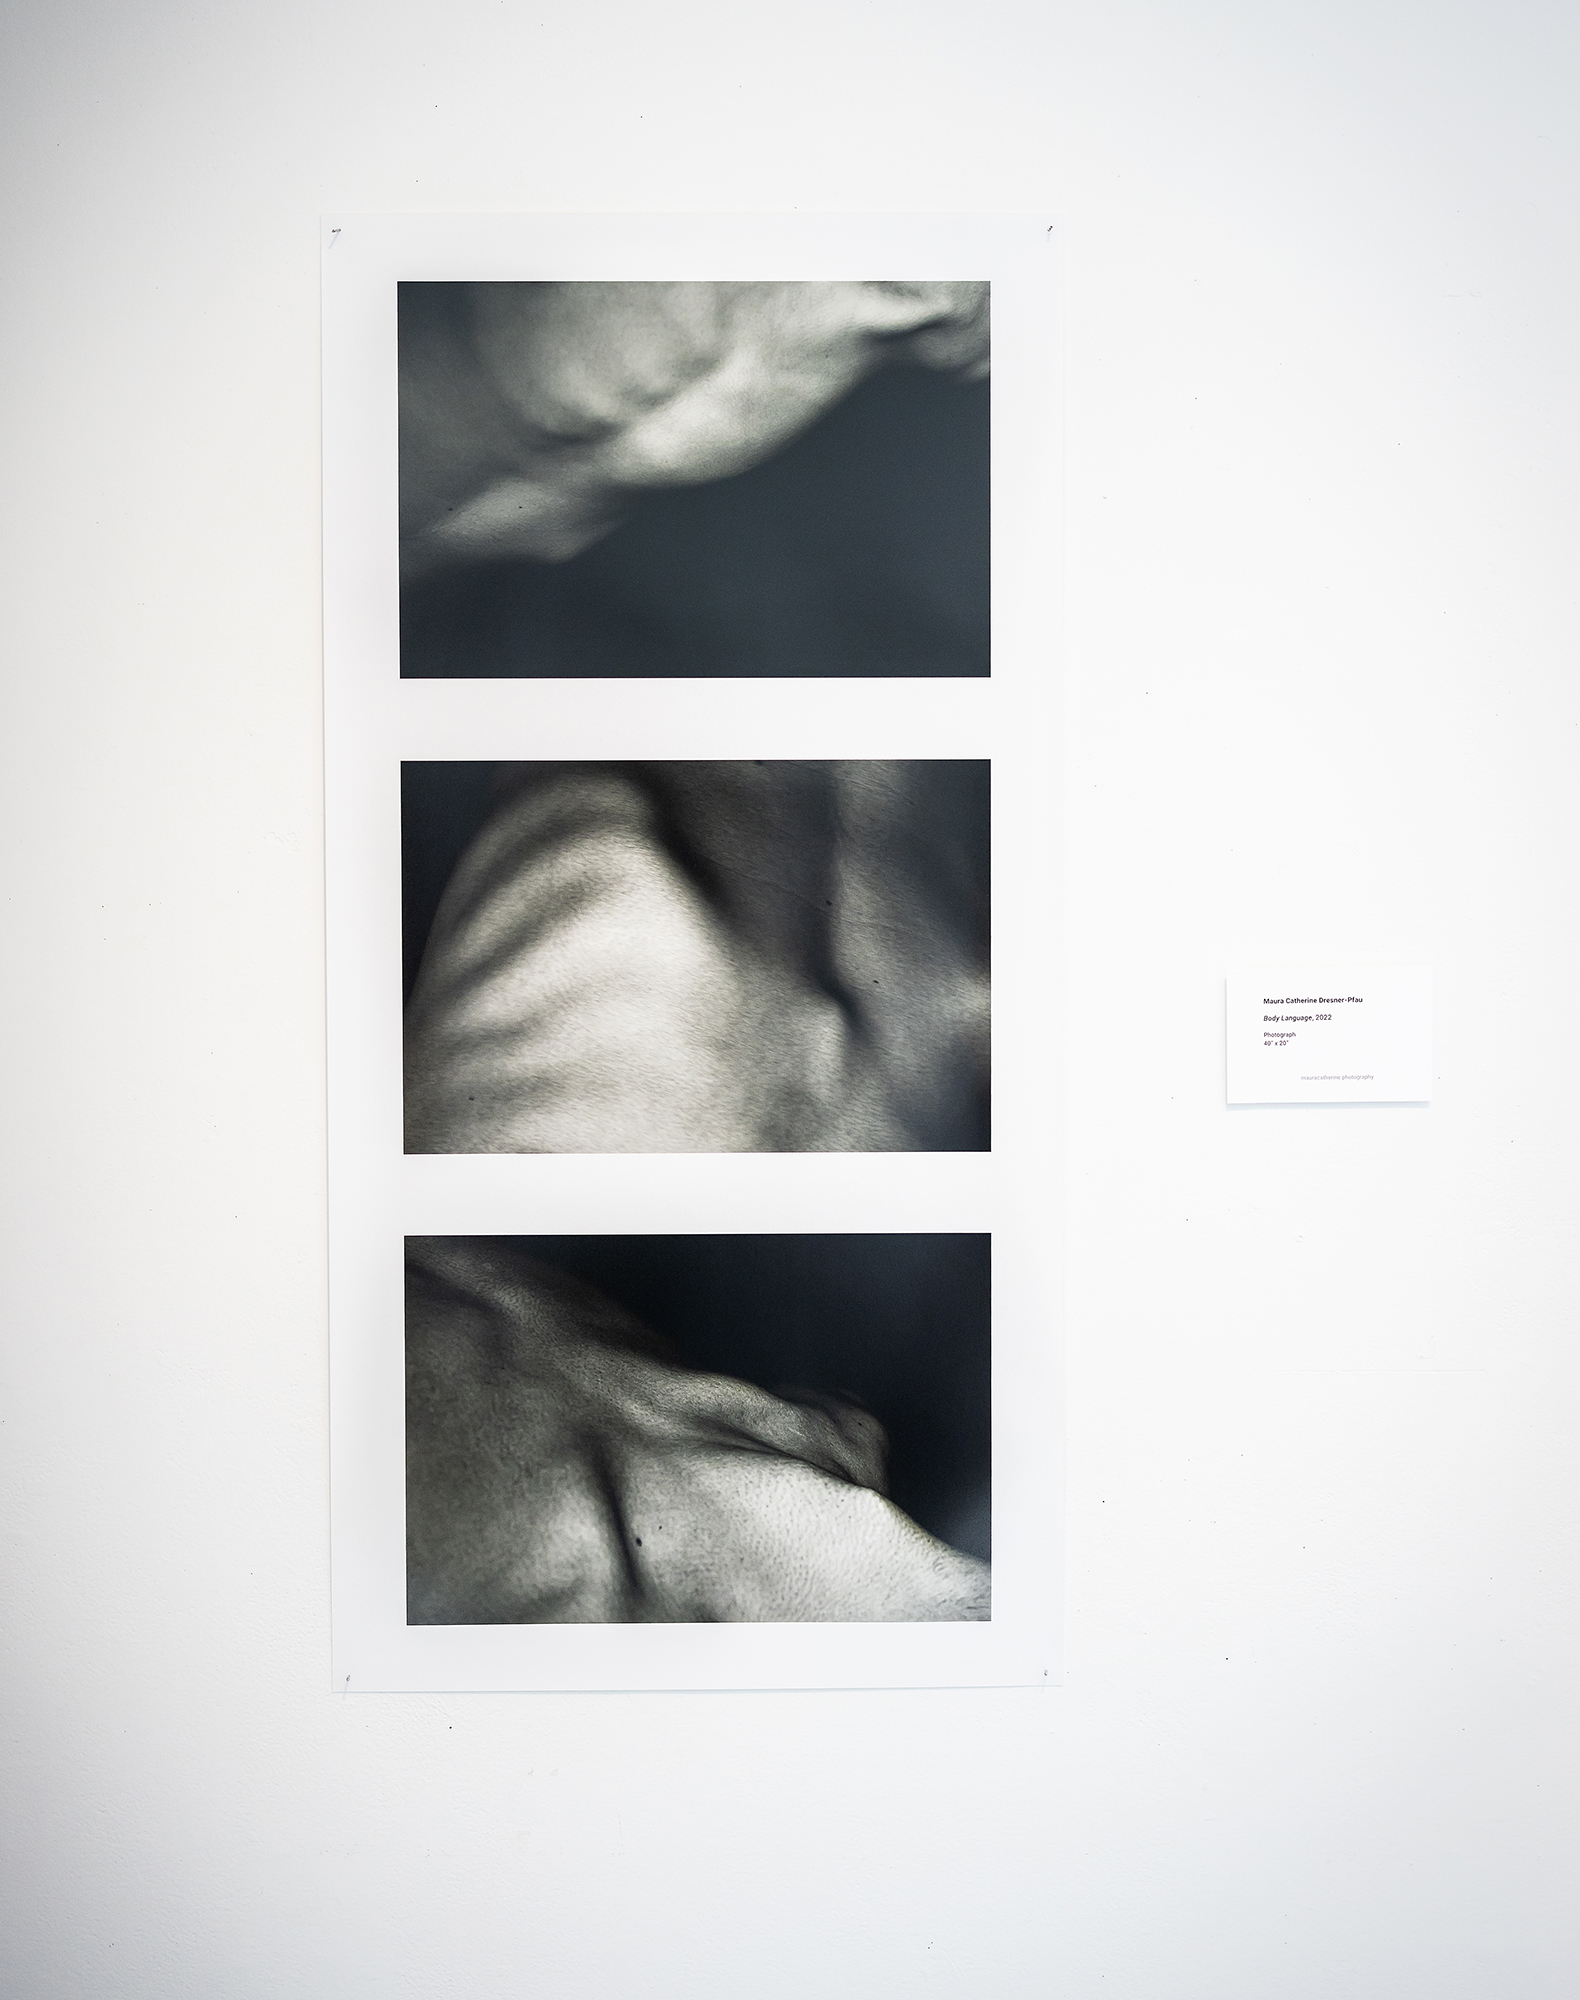 artwork with three photographs of close ups of body parts out of focus